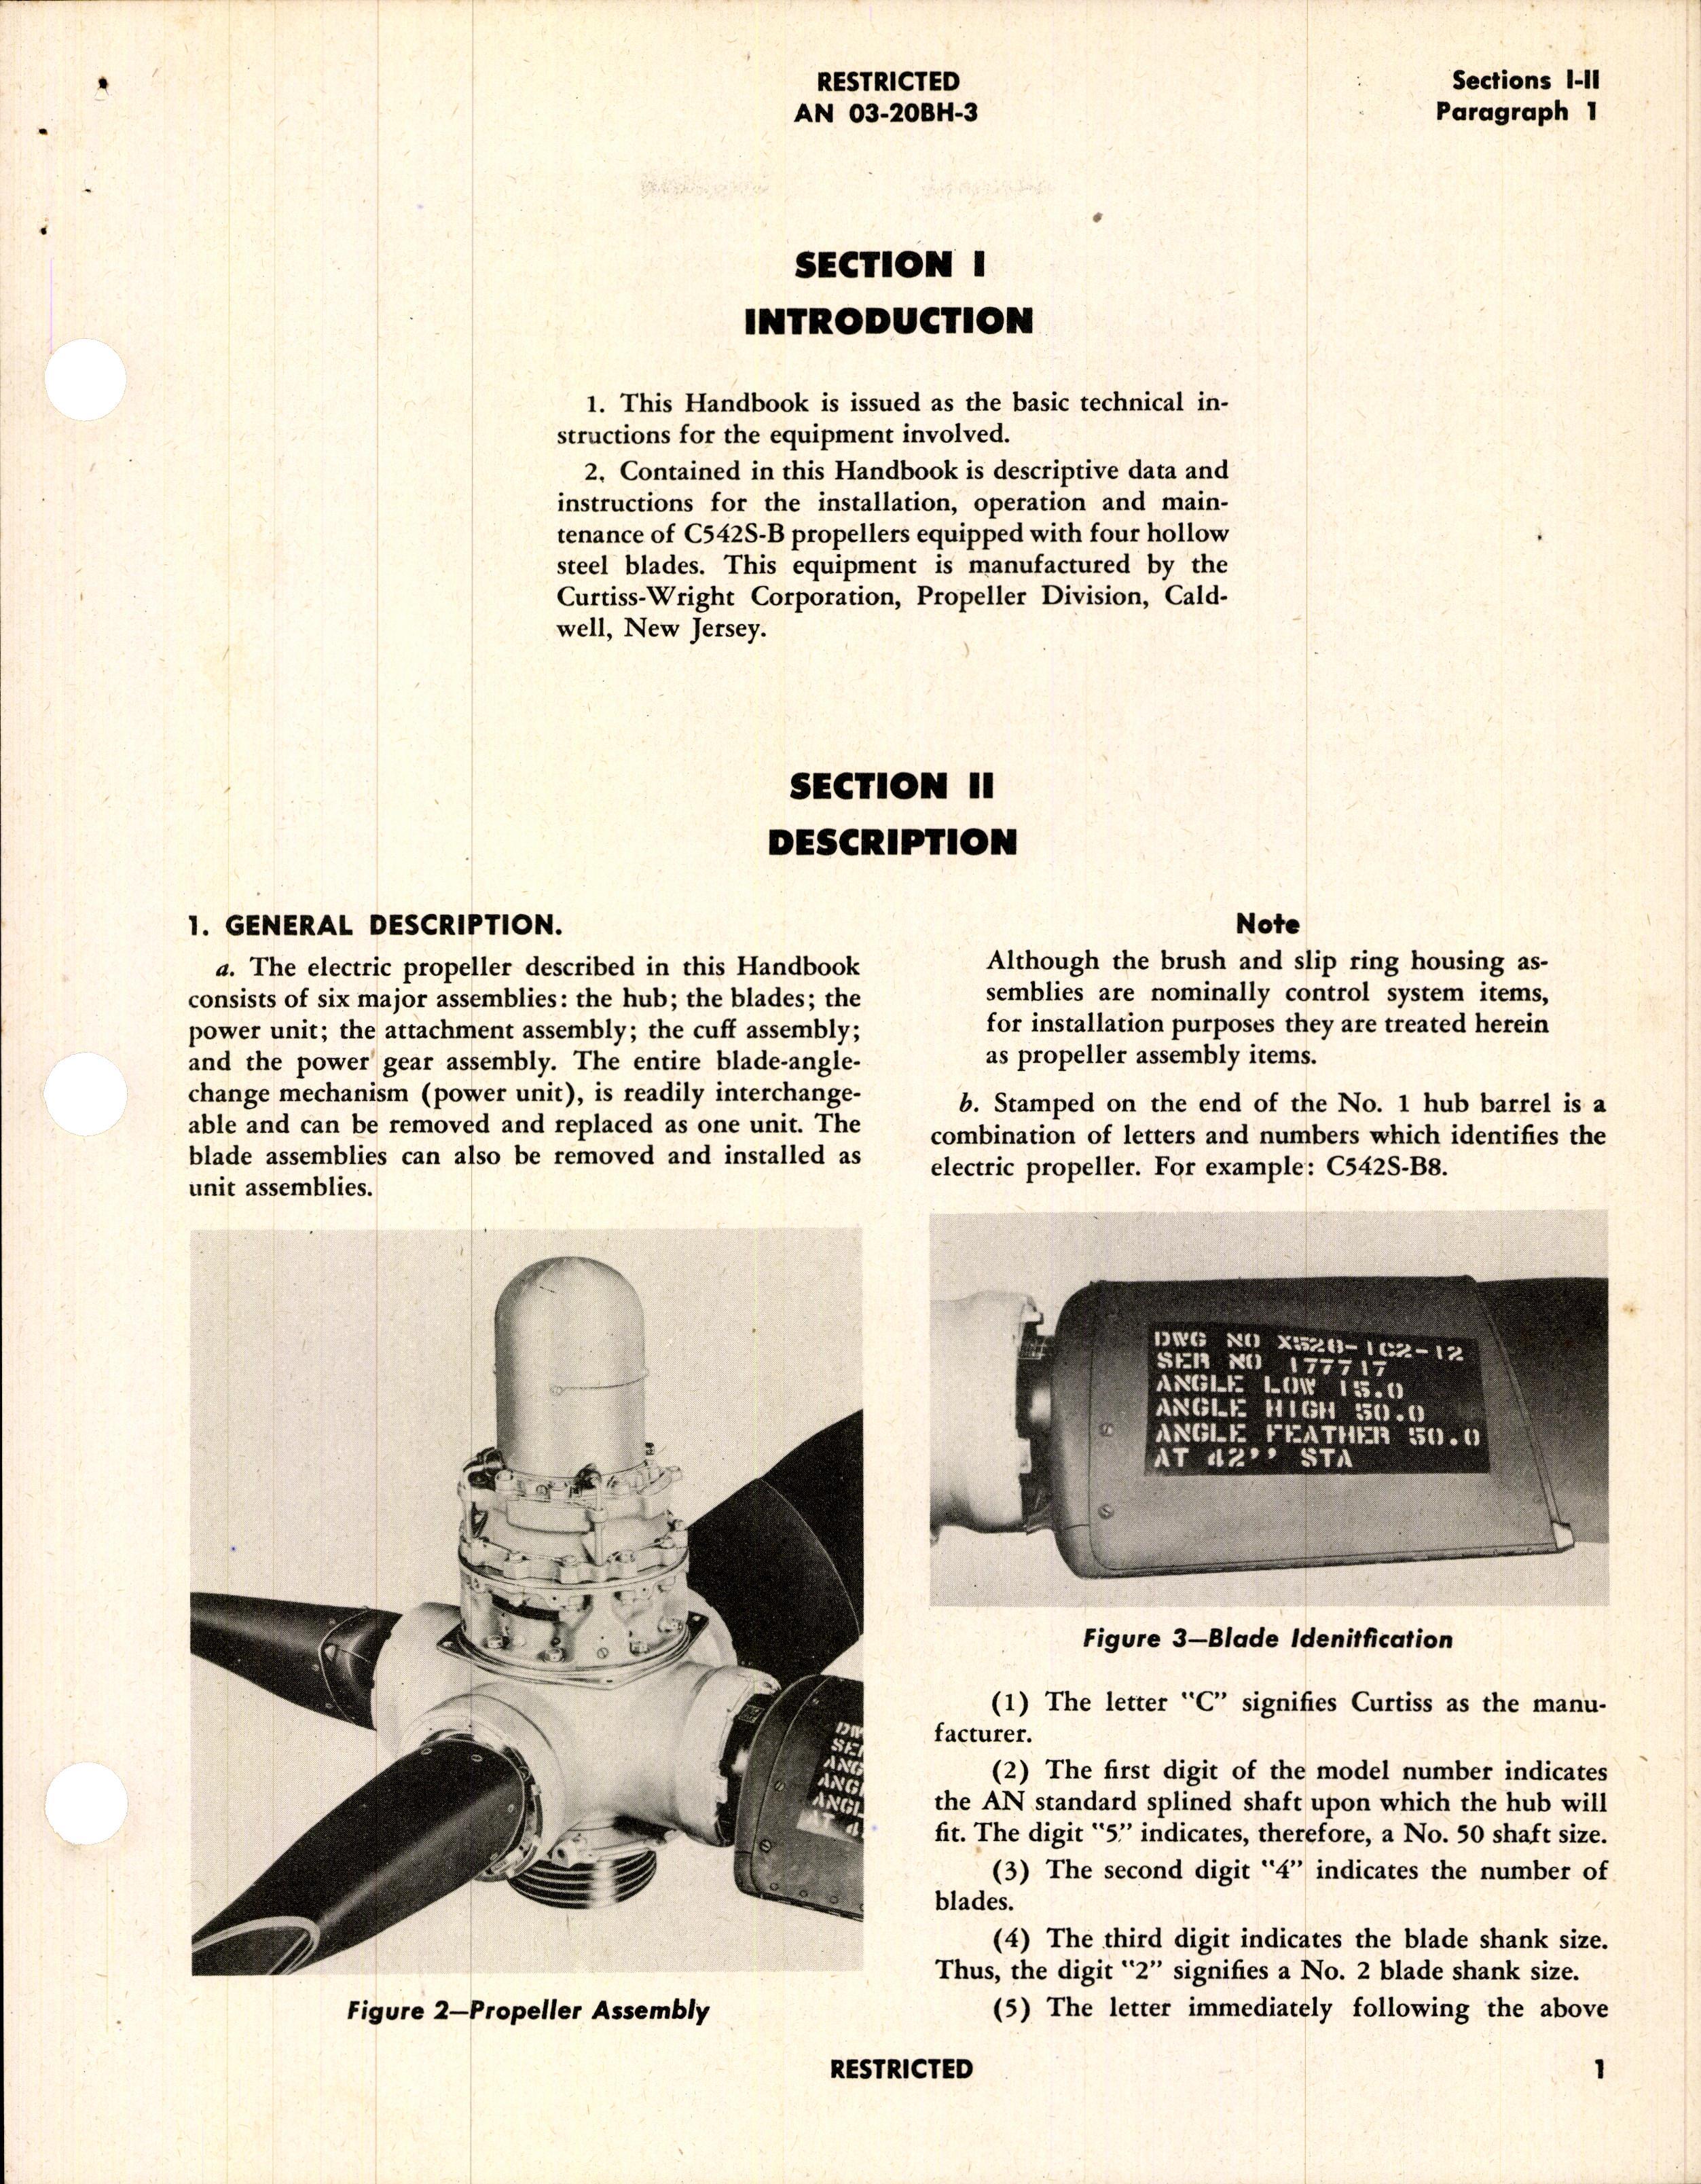 Sample page 11 from AirCorps Library document: Handbook of Instructions with Parts Catalog for Model C542S-B Electric Propellers- Hollow Steel